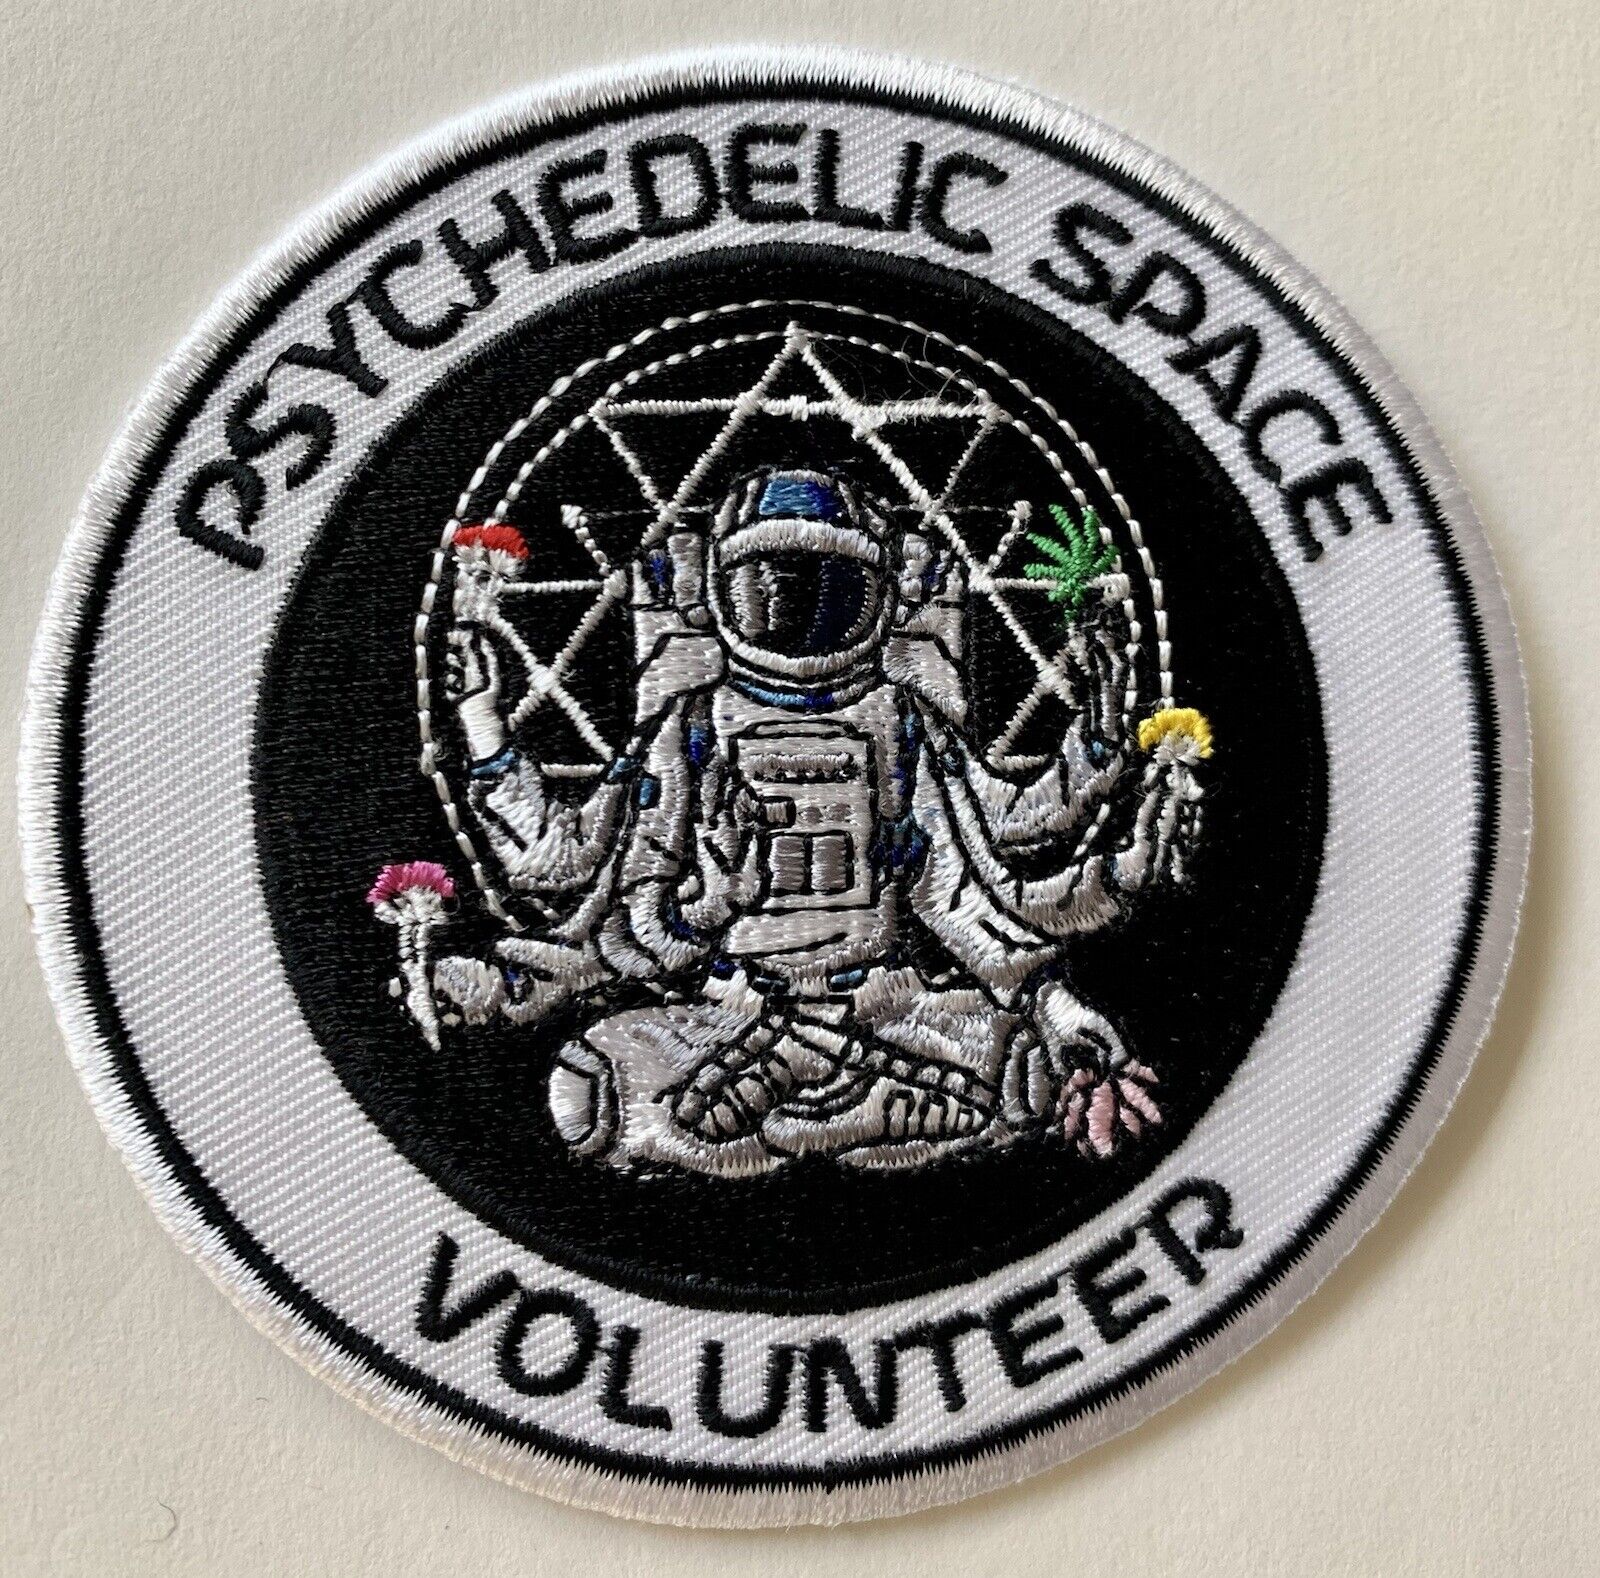 Original NASA Astronaut Psychedelic Research Crew Patch